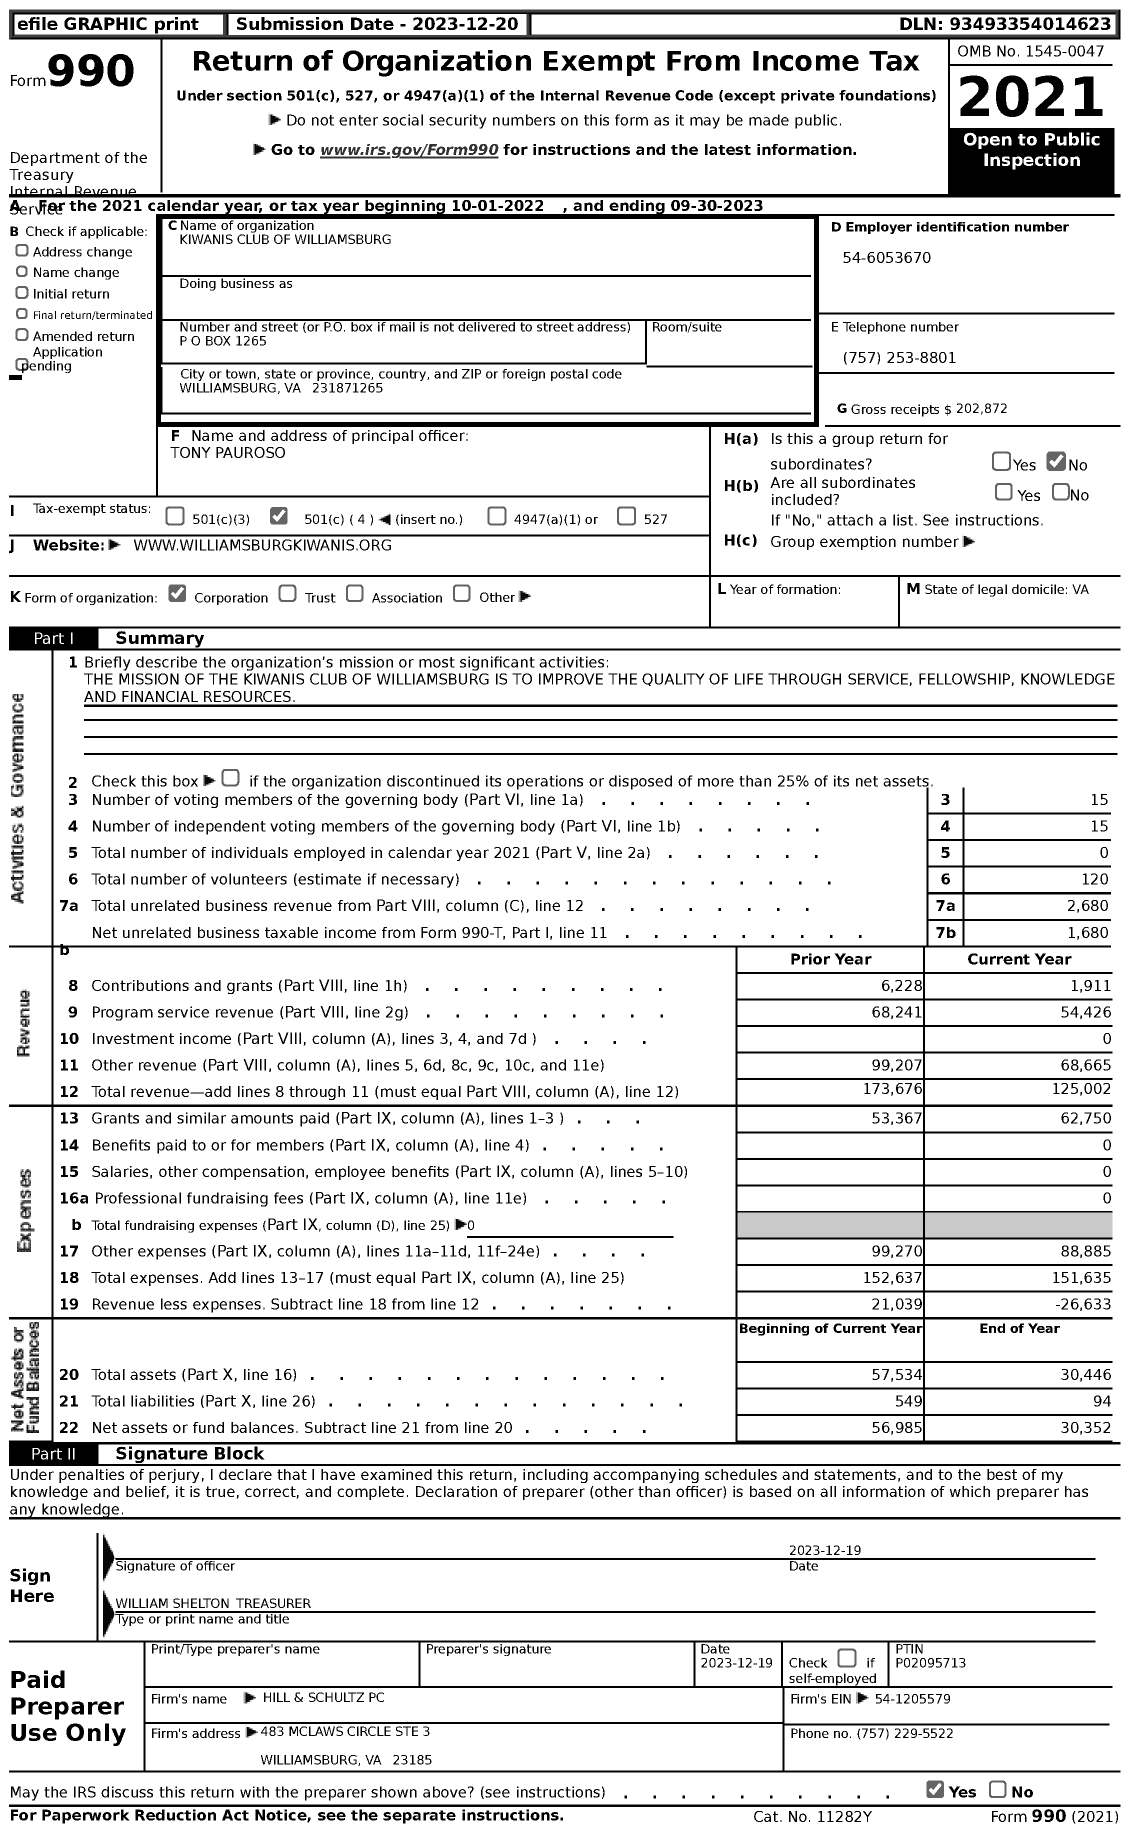 Image of first page of 2022 Form 990 for Kiwanis International - Attention Bill Shelton Treasurer